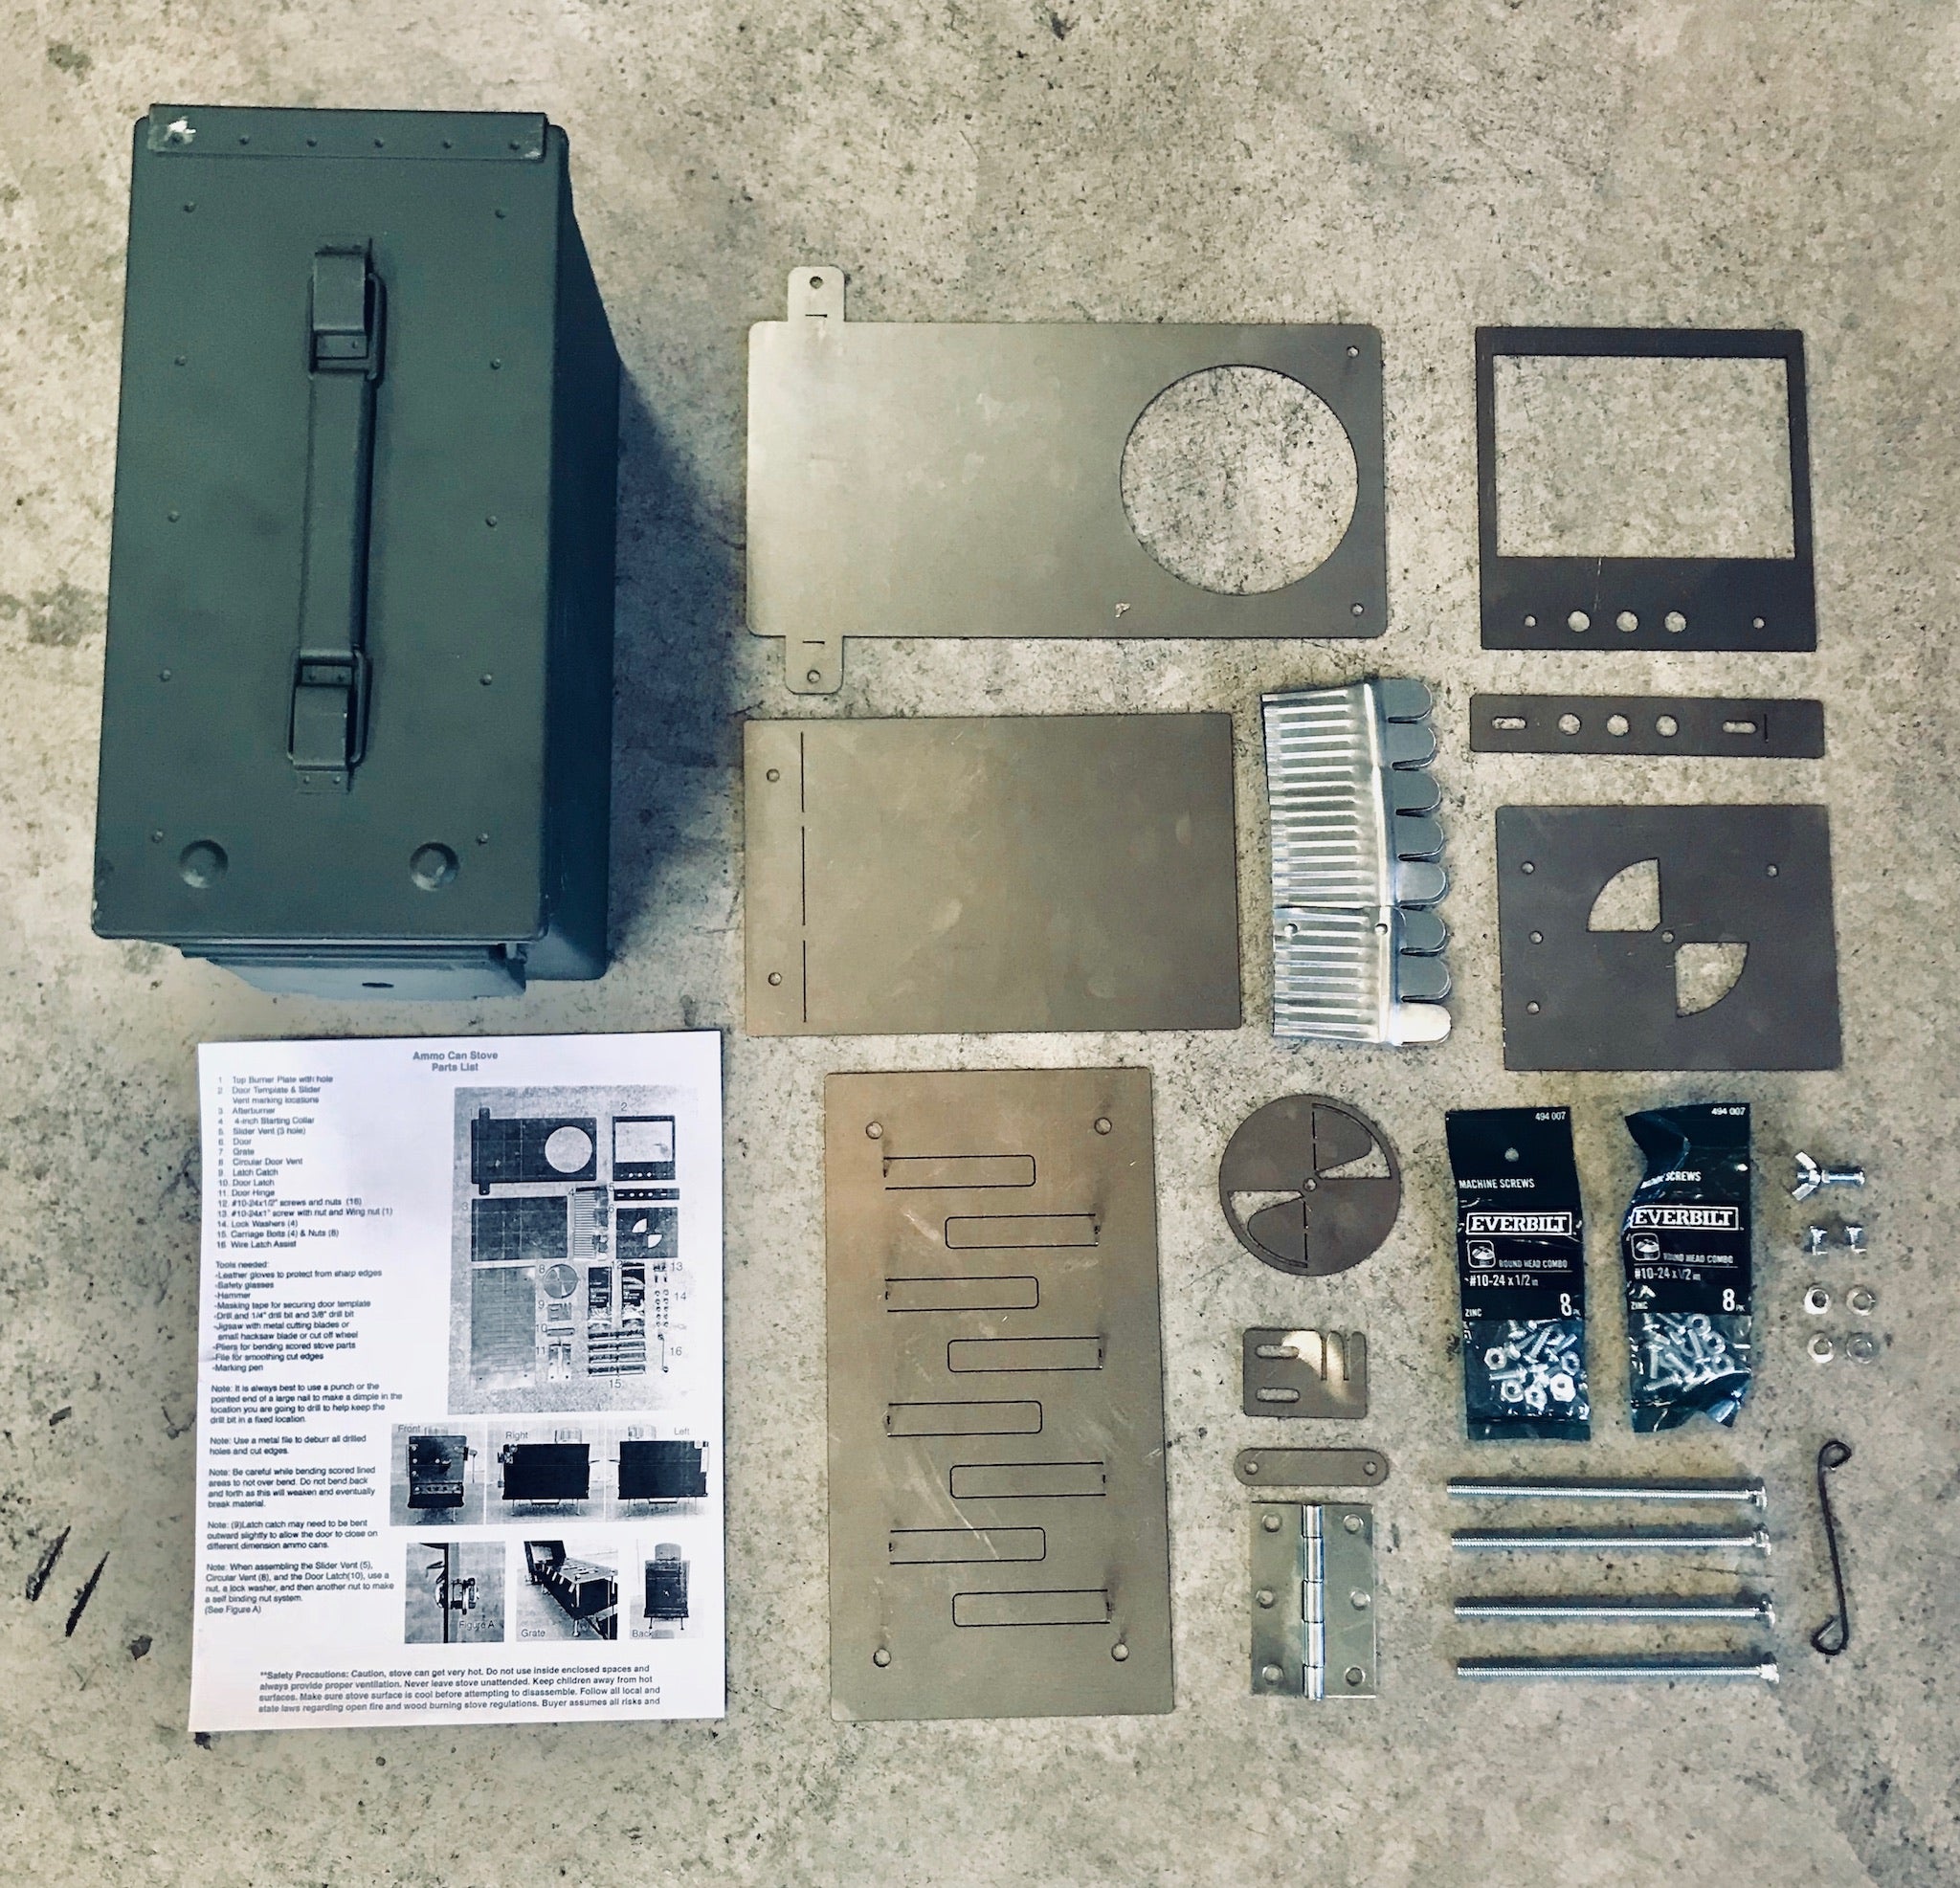 Ammo Can Stove Kit DIY – PackAFlame